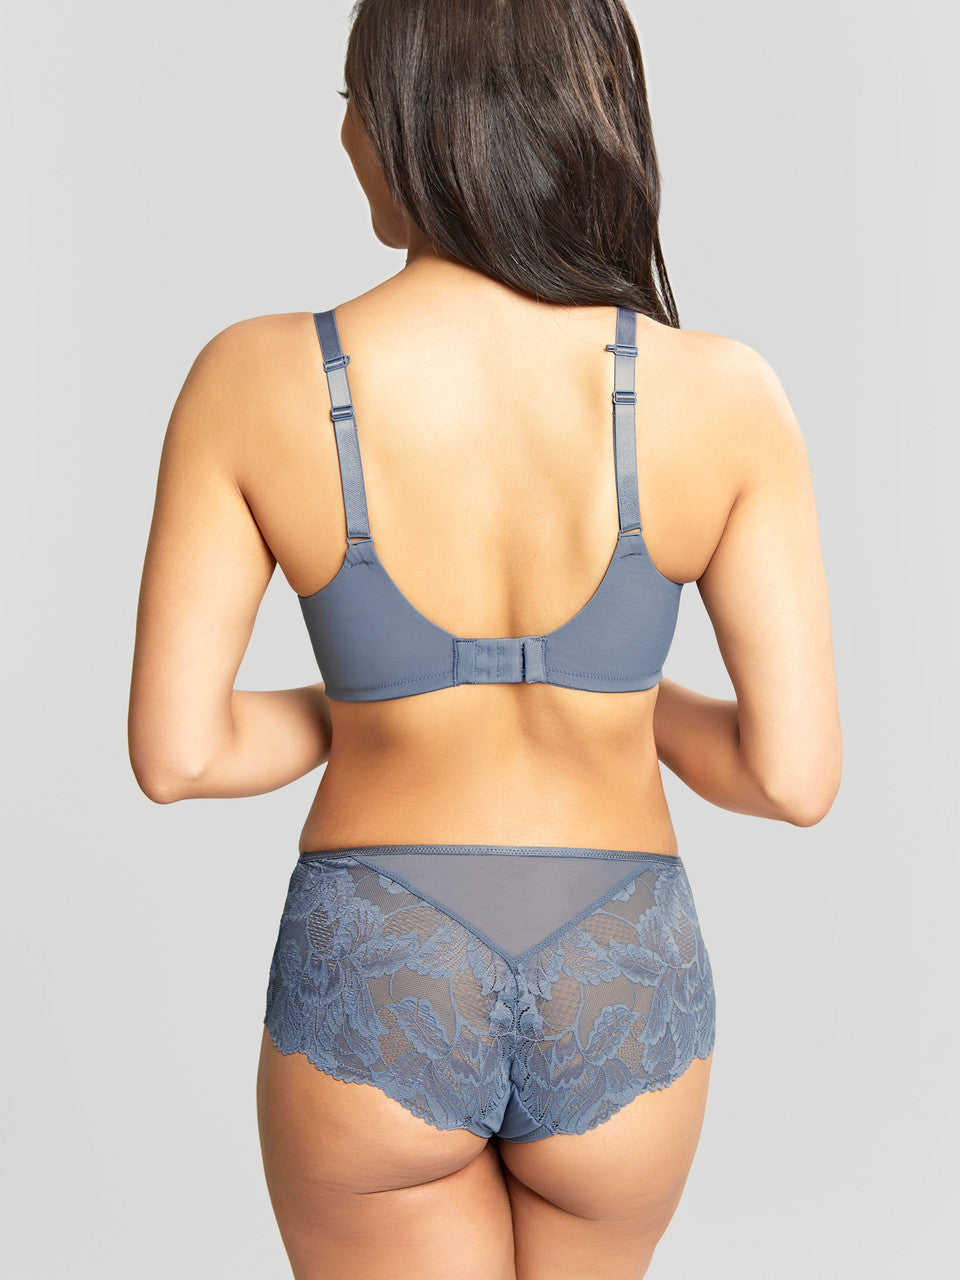 Radiance Full Coverage Bra and matching panty in Steel Blue worn by model back view